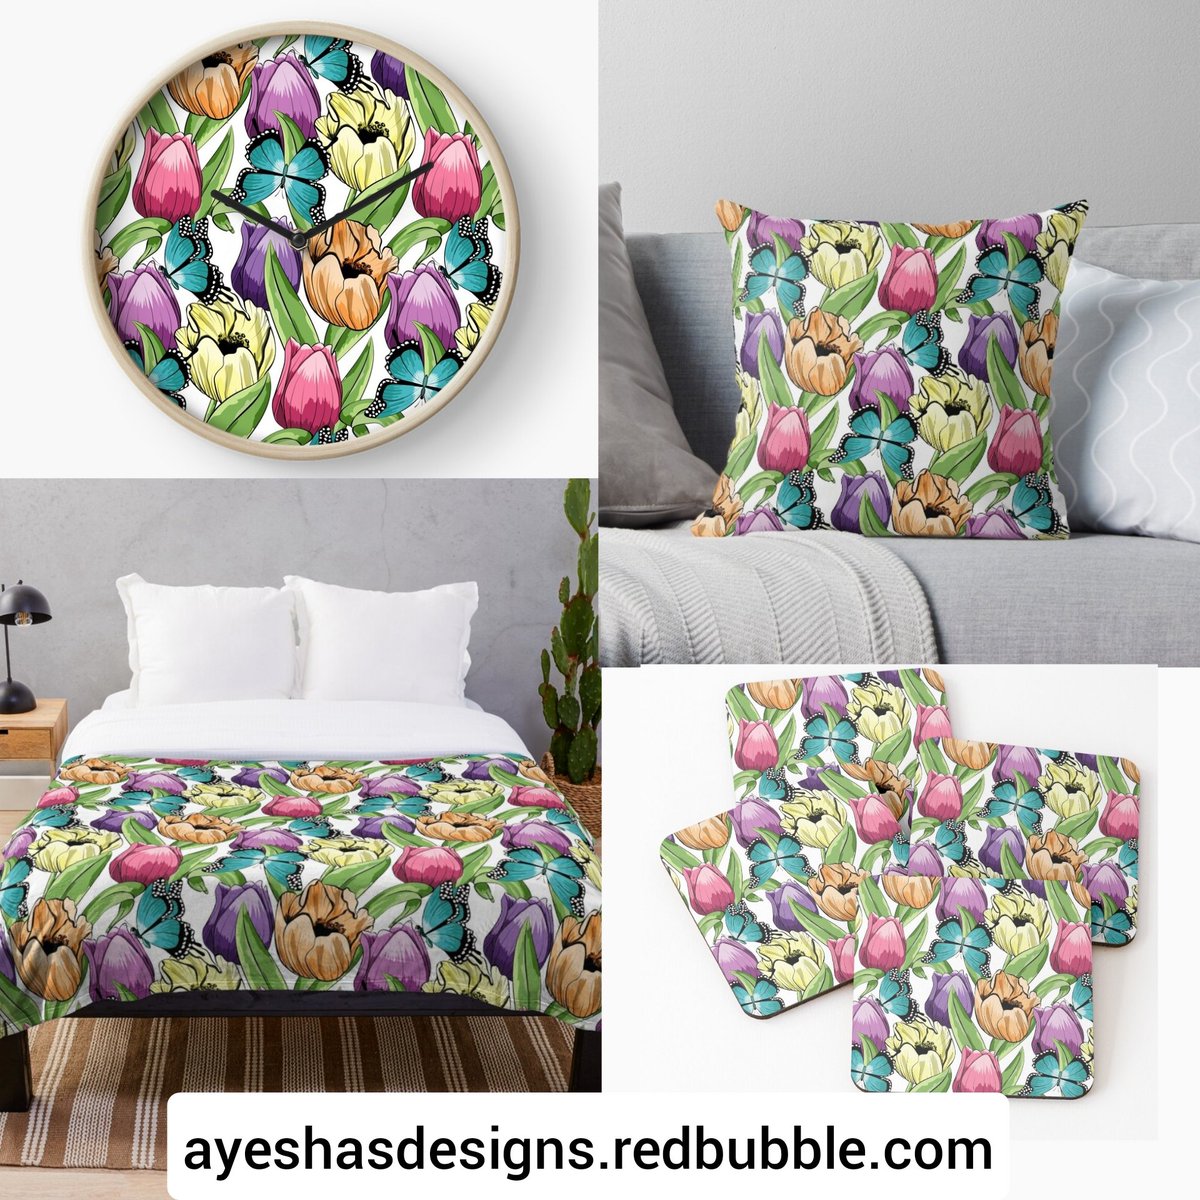 25% Off everything site-wide 
redbubble.com/i/clock/Tulips…
#clock #pillow #throwblanket #blanket #coasters #art #tulips #floral #butterflies #spring #sale